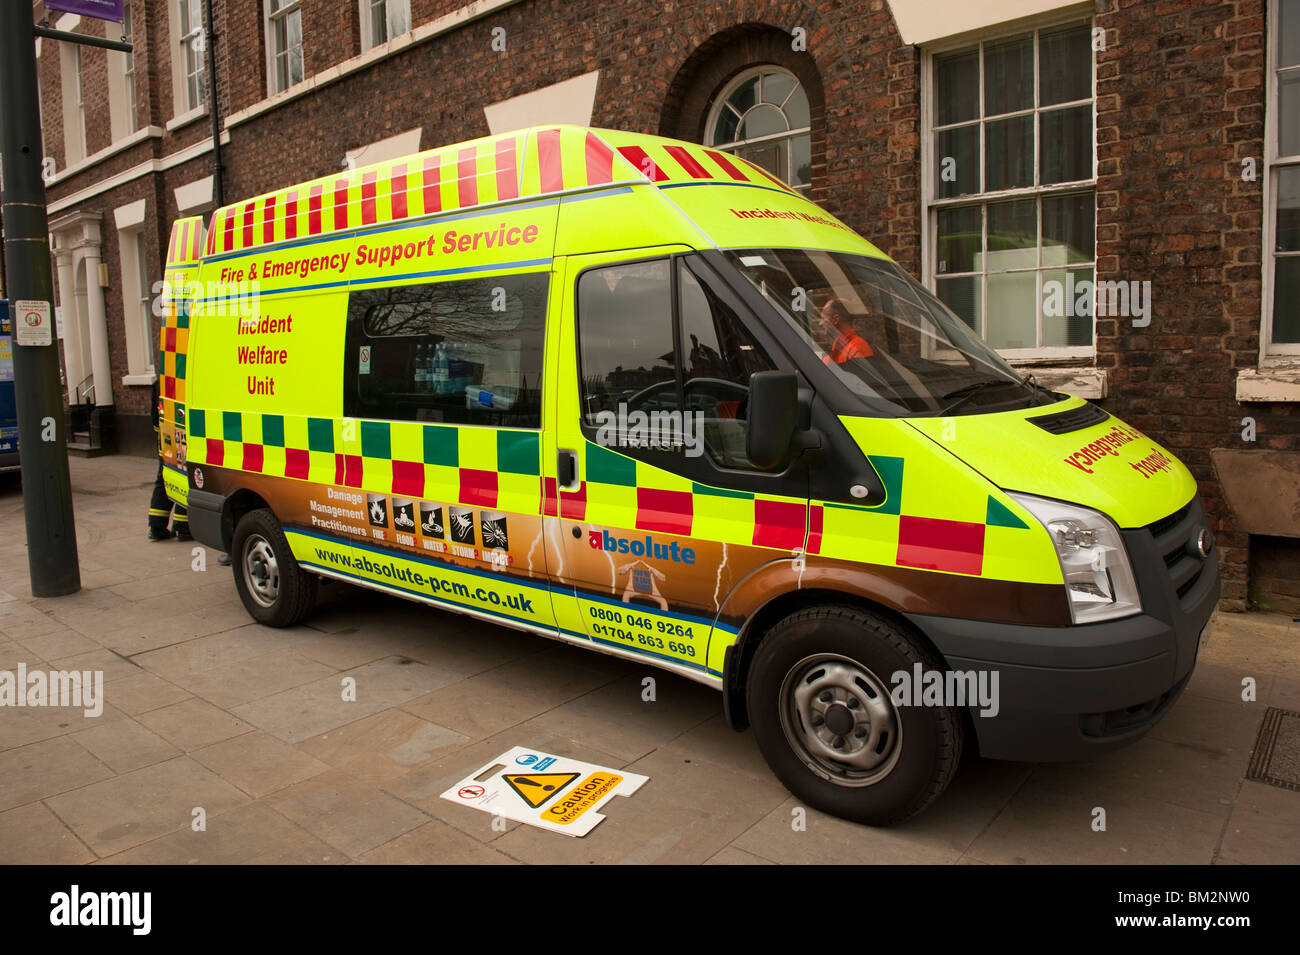 Fire Incident Welfare Unit Emergency Support Vehicle Stock Photo